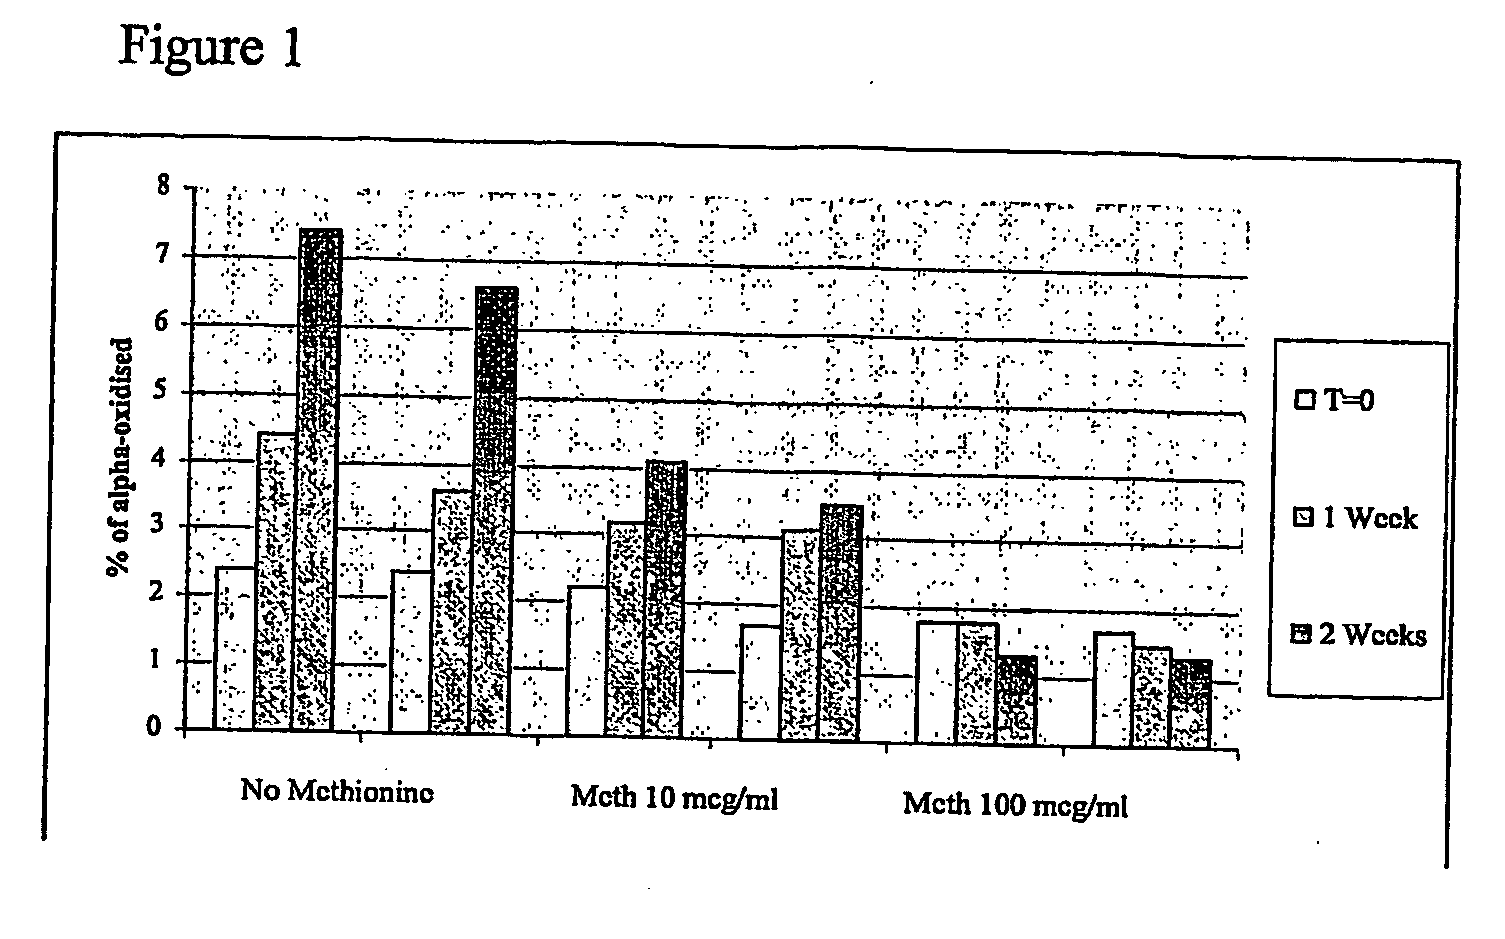 Liquid pharmaceutical formulations of fsh and lh together with a non-ionic surfactant